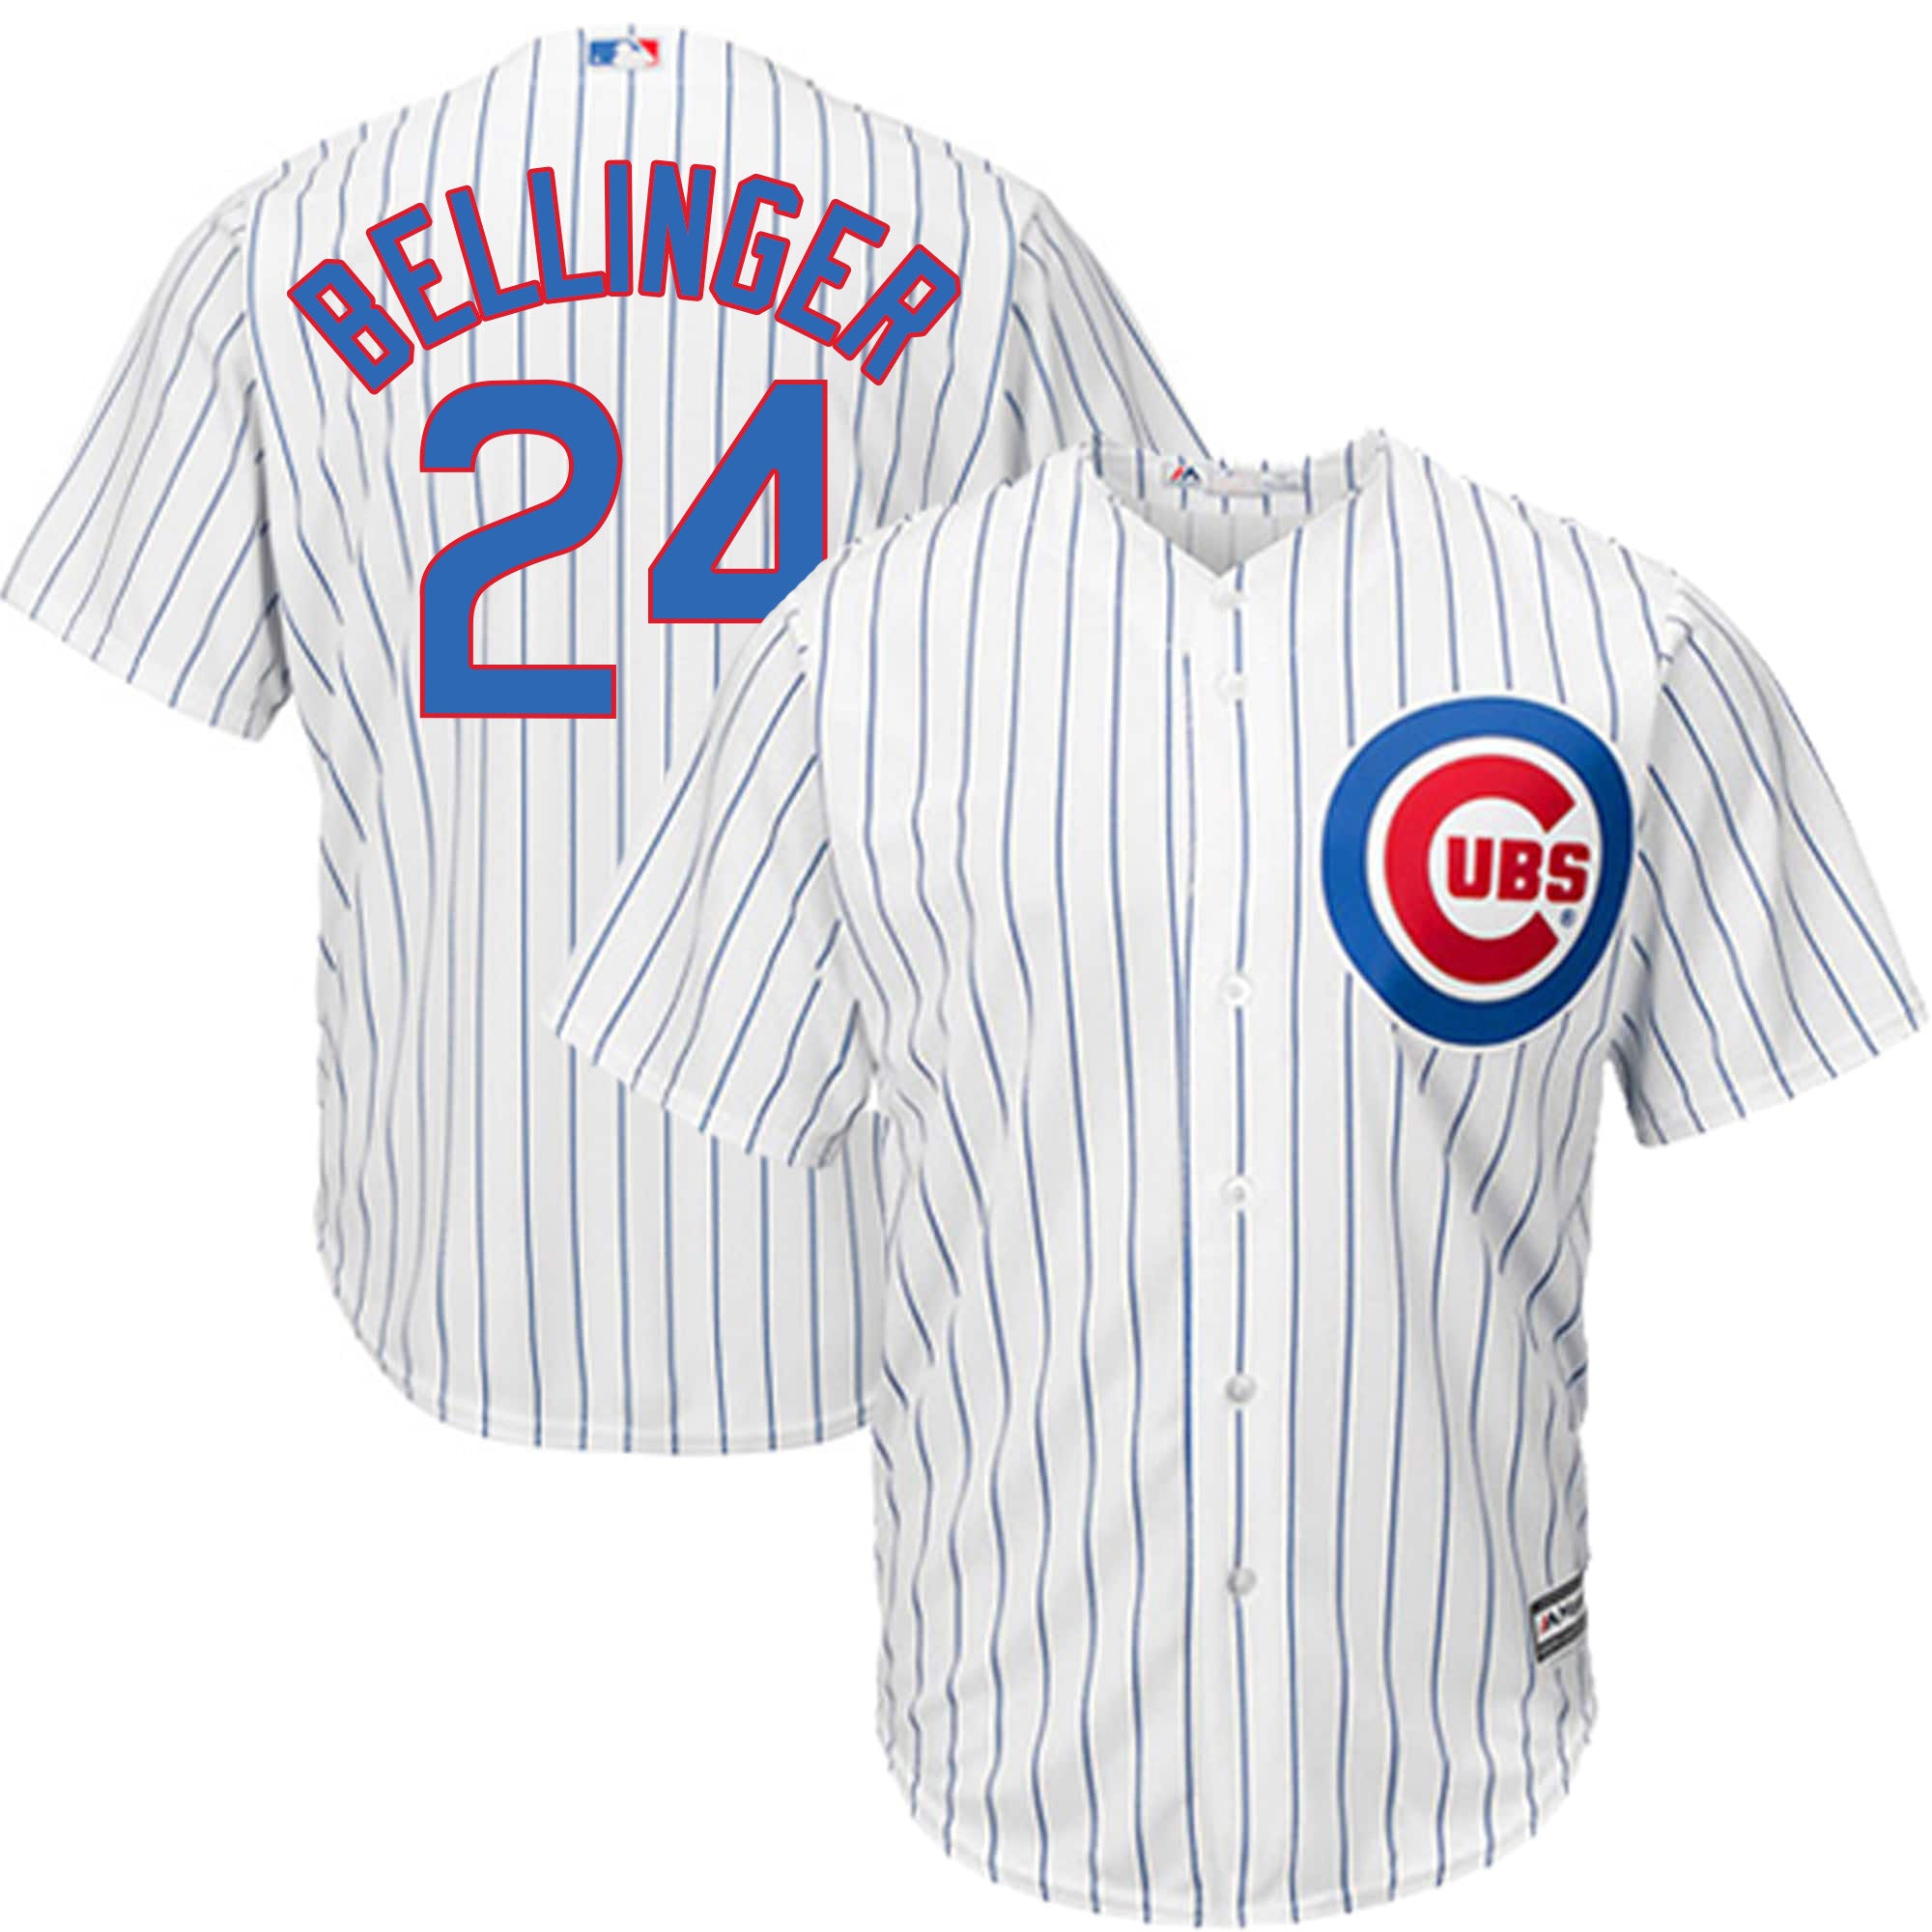 Profile Men's Royal Chicago Cubs Big & Tall Replica Team Jersey